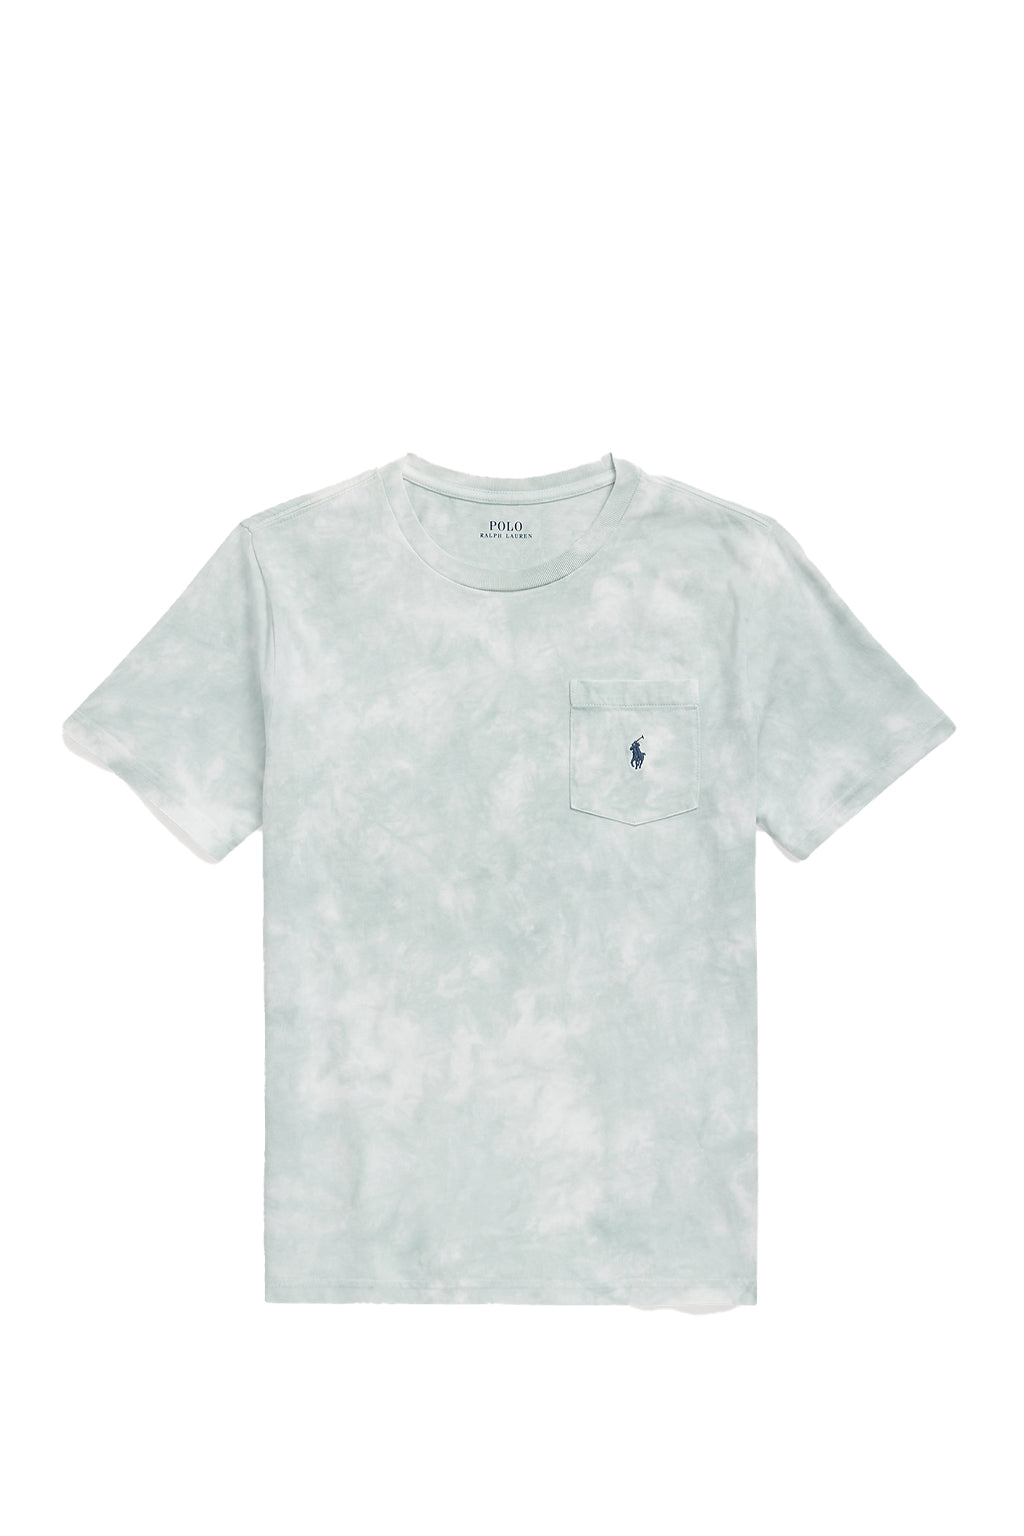 Polo Ralph Lauren - Boys Washed Cotton Jersey Pocket Tee